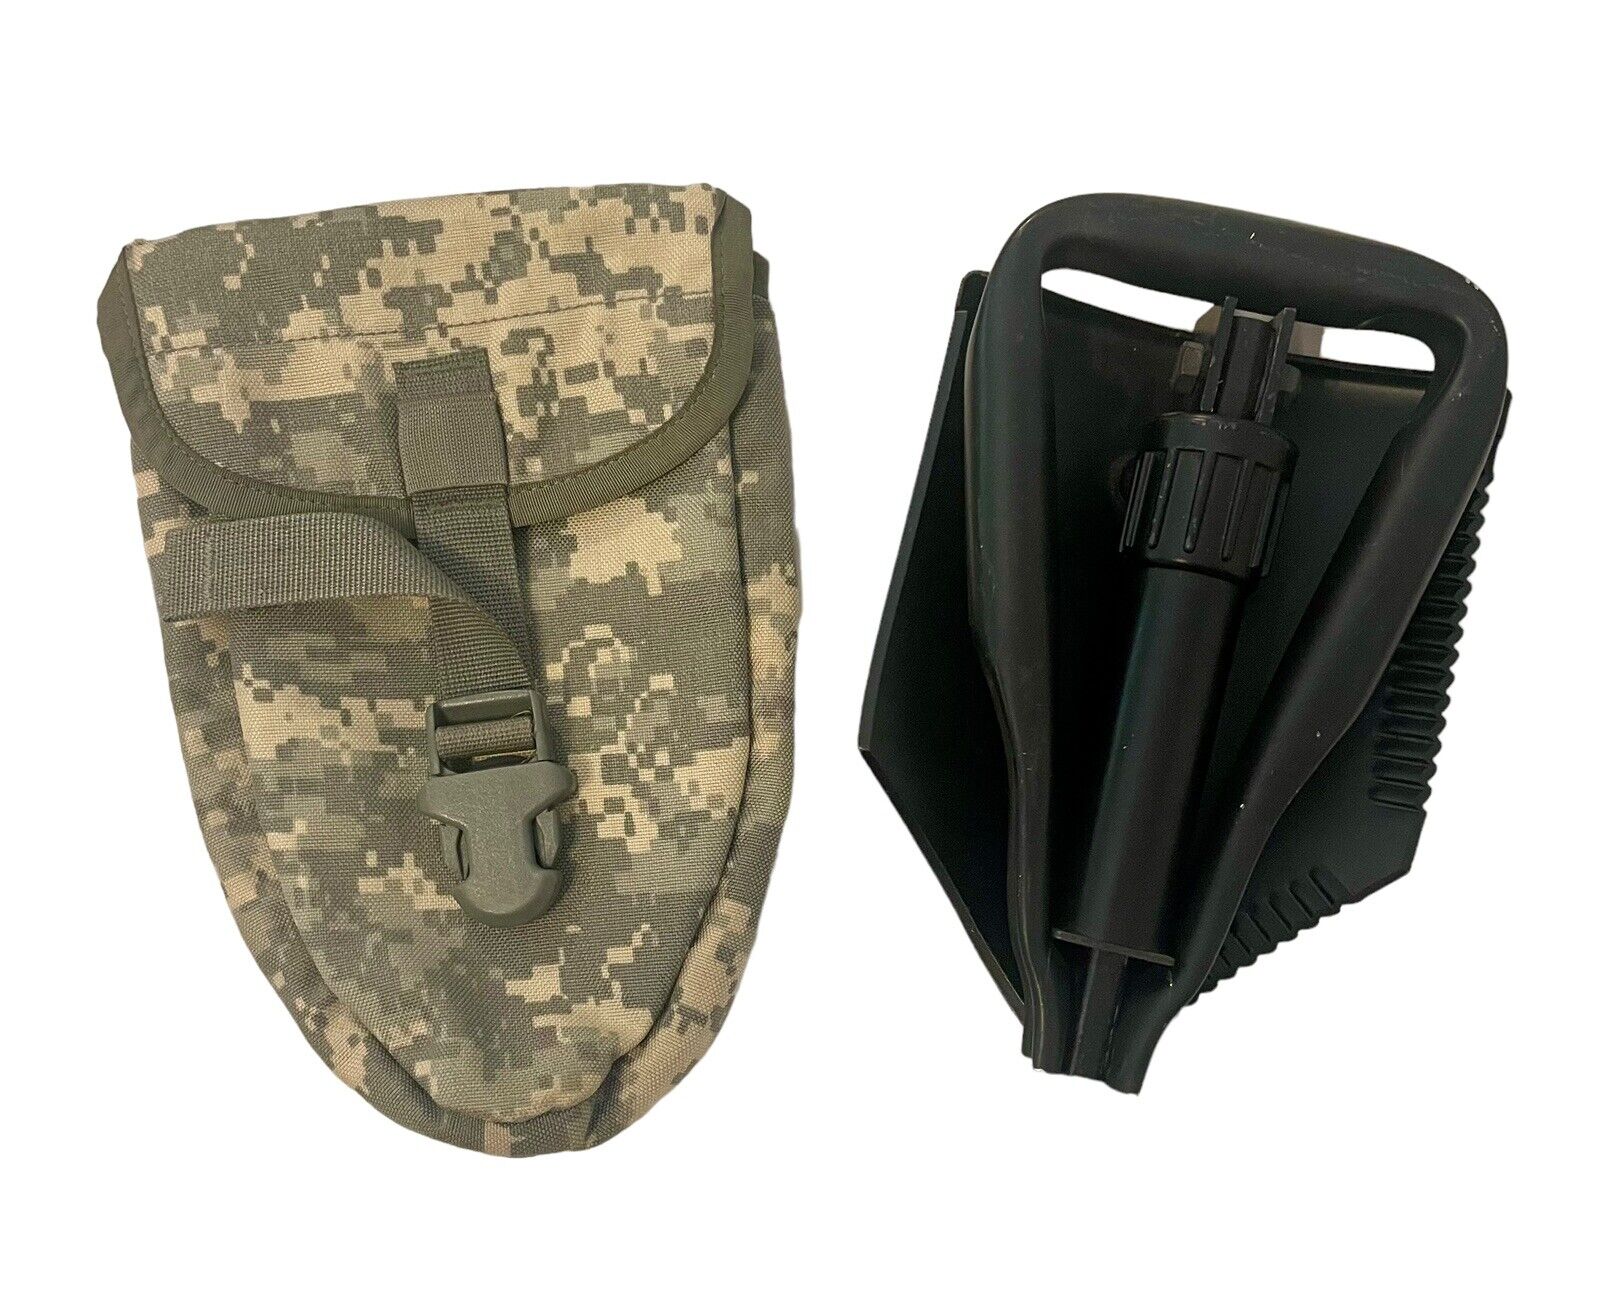 USGI Military E TOOL Entrenching Intrenching Tool Shovel w ACU UCP Cover Carrier